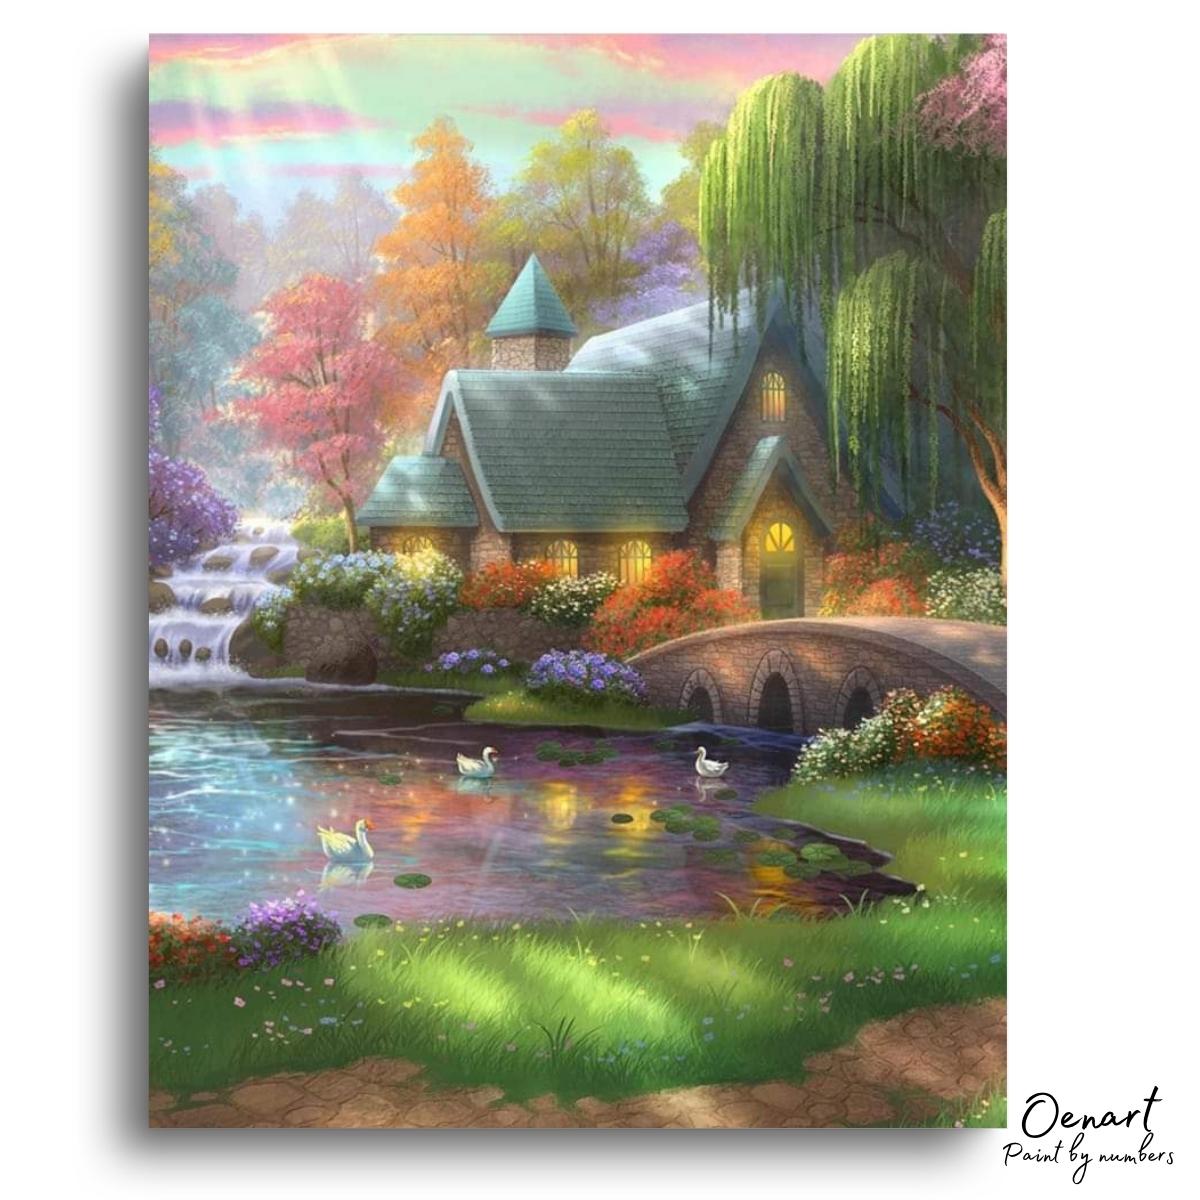 Magical Home - Paint By Numbers Kit